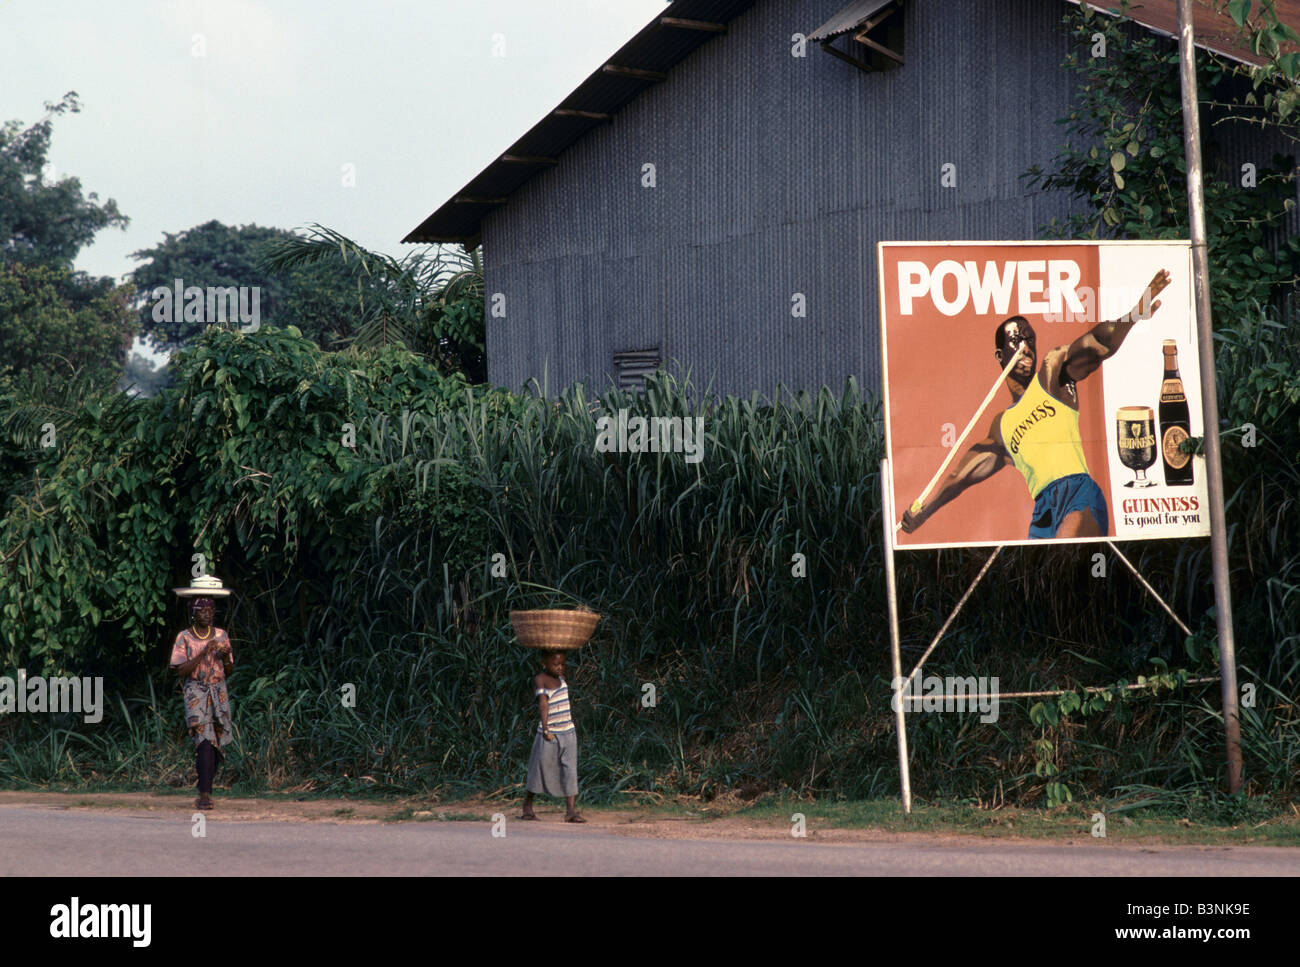 CHILDREN CARRYING ITEMS ON THEIR HEADS, WALKING ALONG RURAL ROAD, PASSING BILLBOARD ADVERTISING POSTER FOR GUINNESS Stock Photo